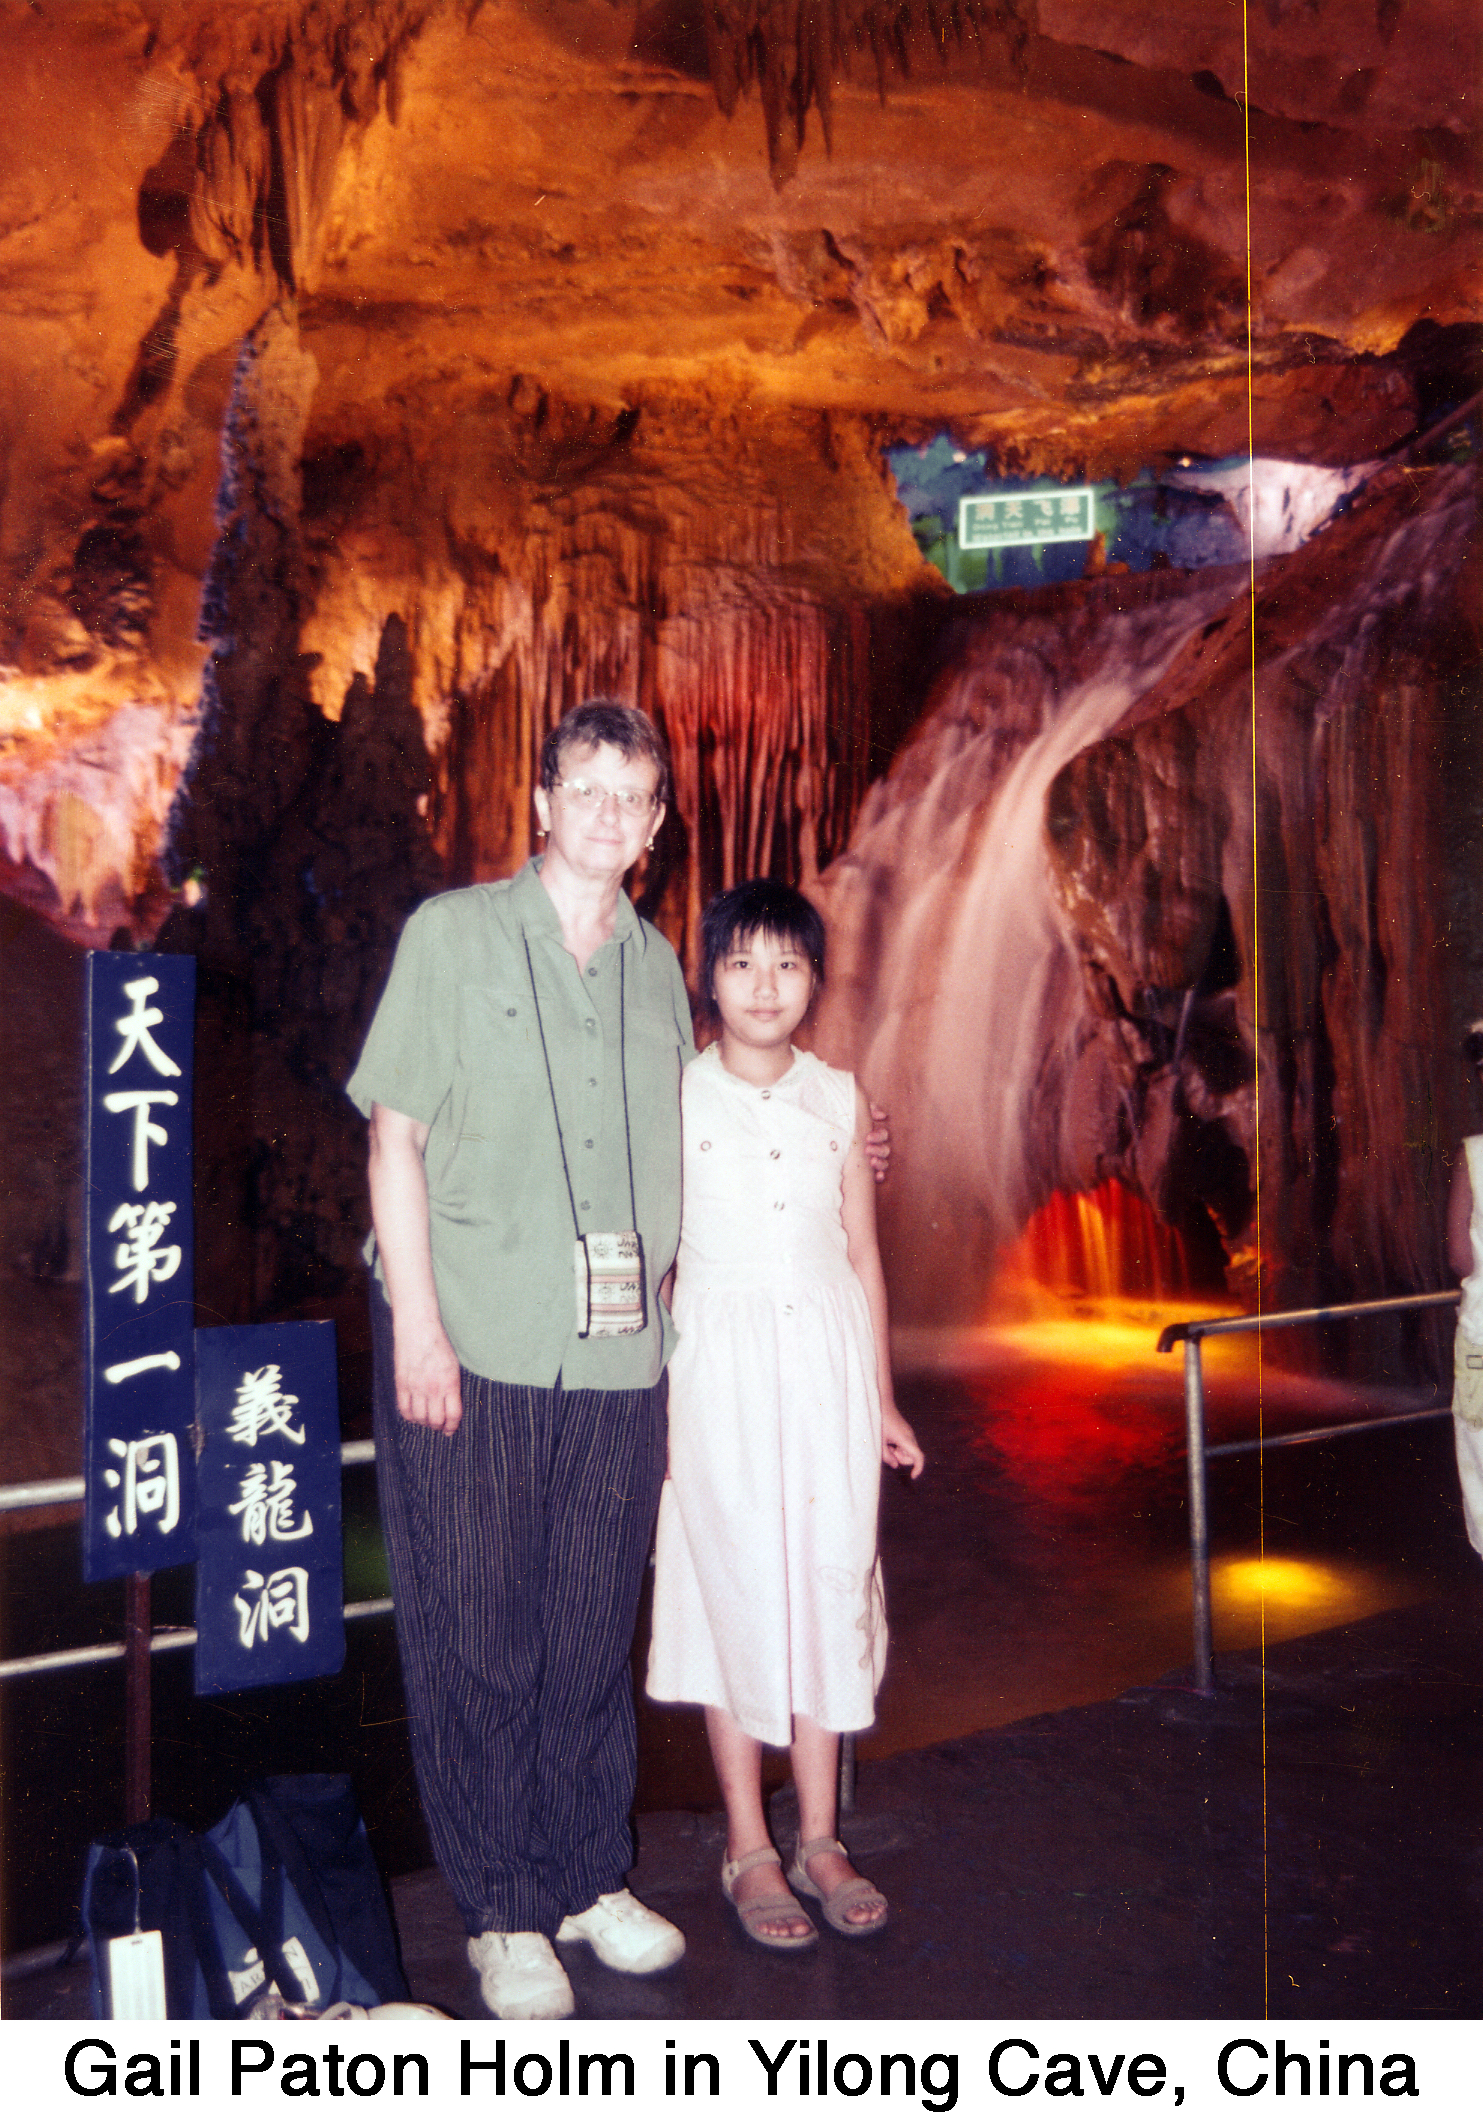 Gail Holm standing with a student in front of colorfully lit rock formations